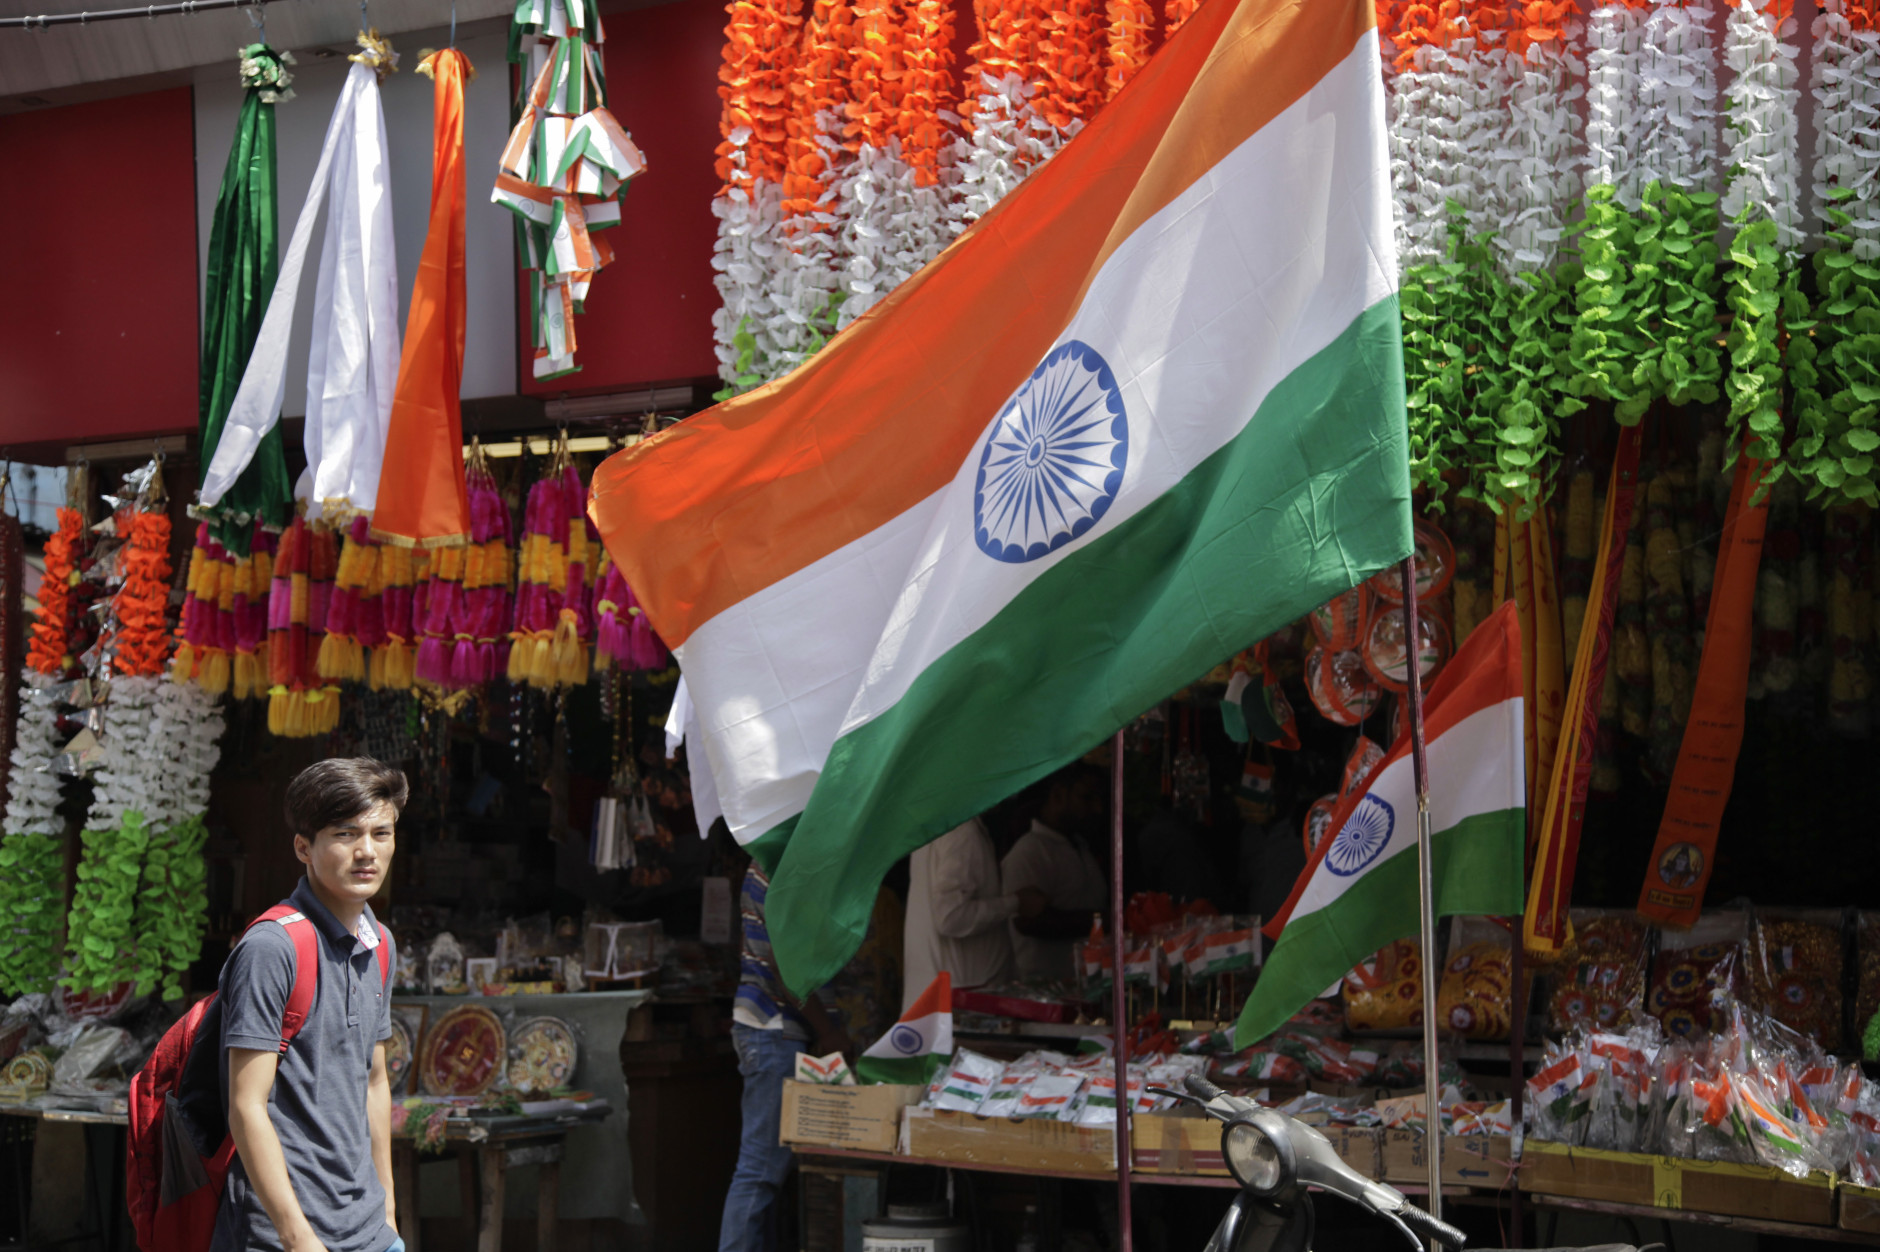 A shopkeeper displays Indian flags at the entrance of his shop in Jammu, India, Saturday, Aug.13, 2016. Shops across the country are laden with flags and other festive paraphernalia as India prepares to celebrate its Independence Day on Aug. 15. (AP Photo/Channi Anand)